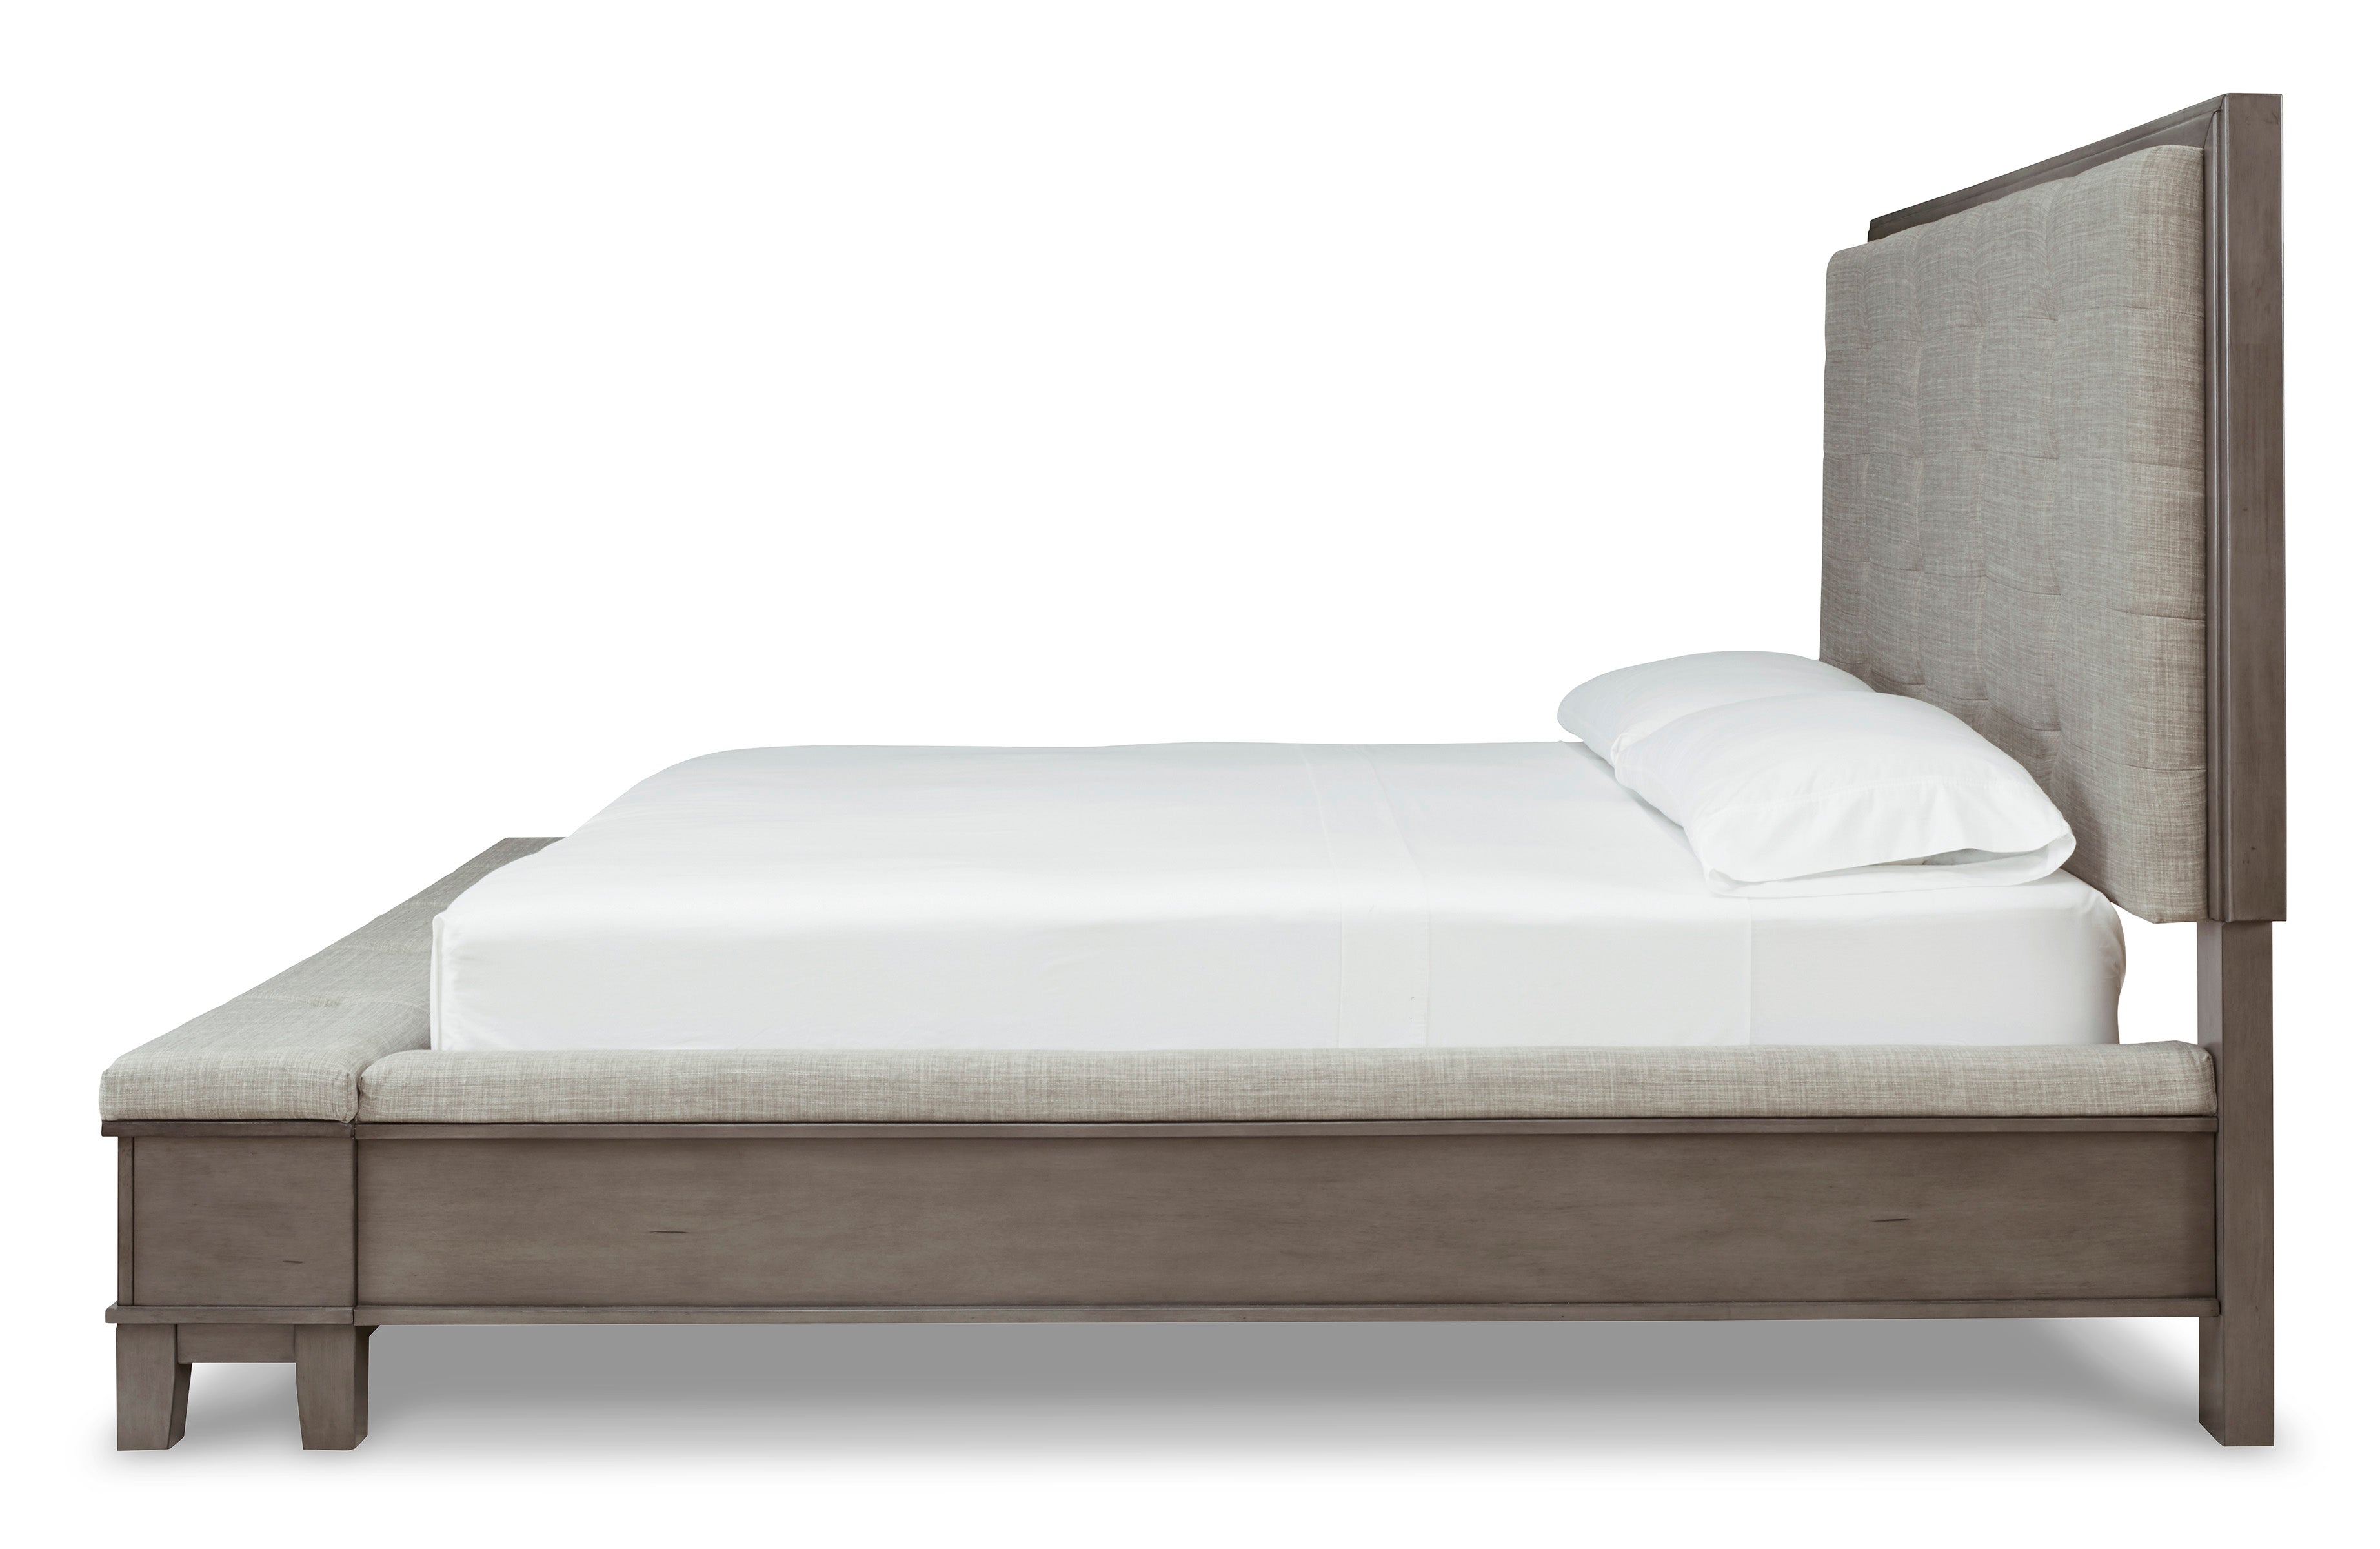 Tristian King Size Bed